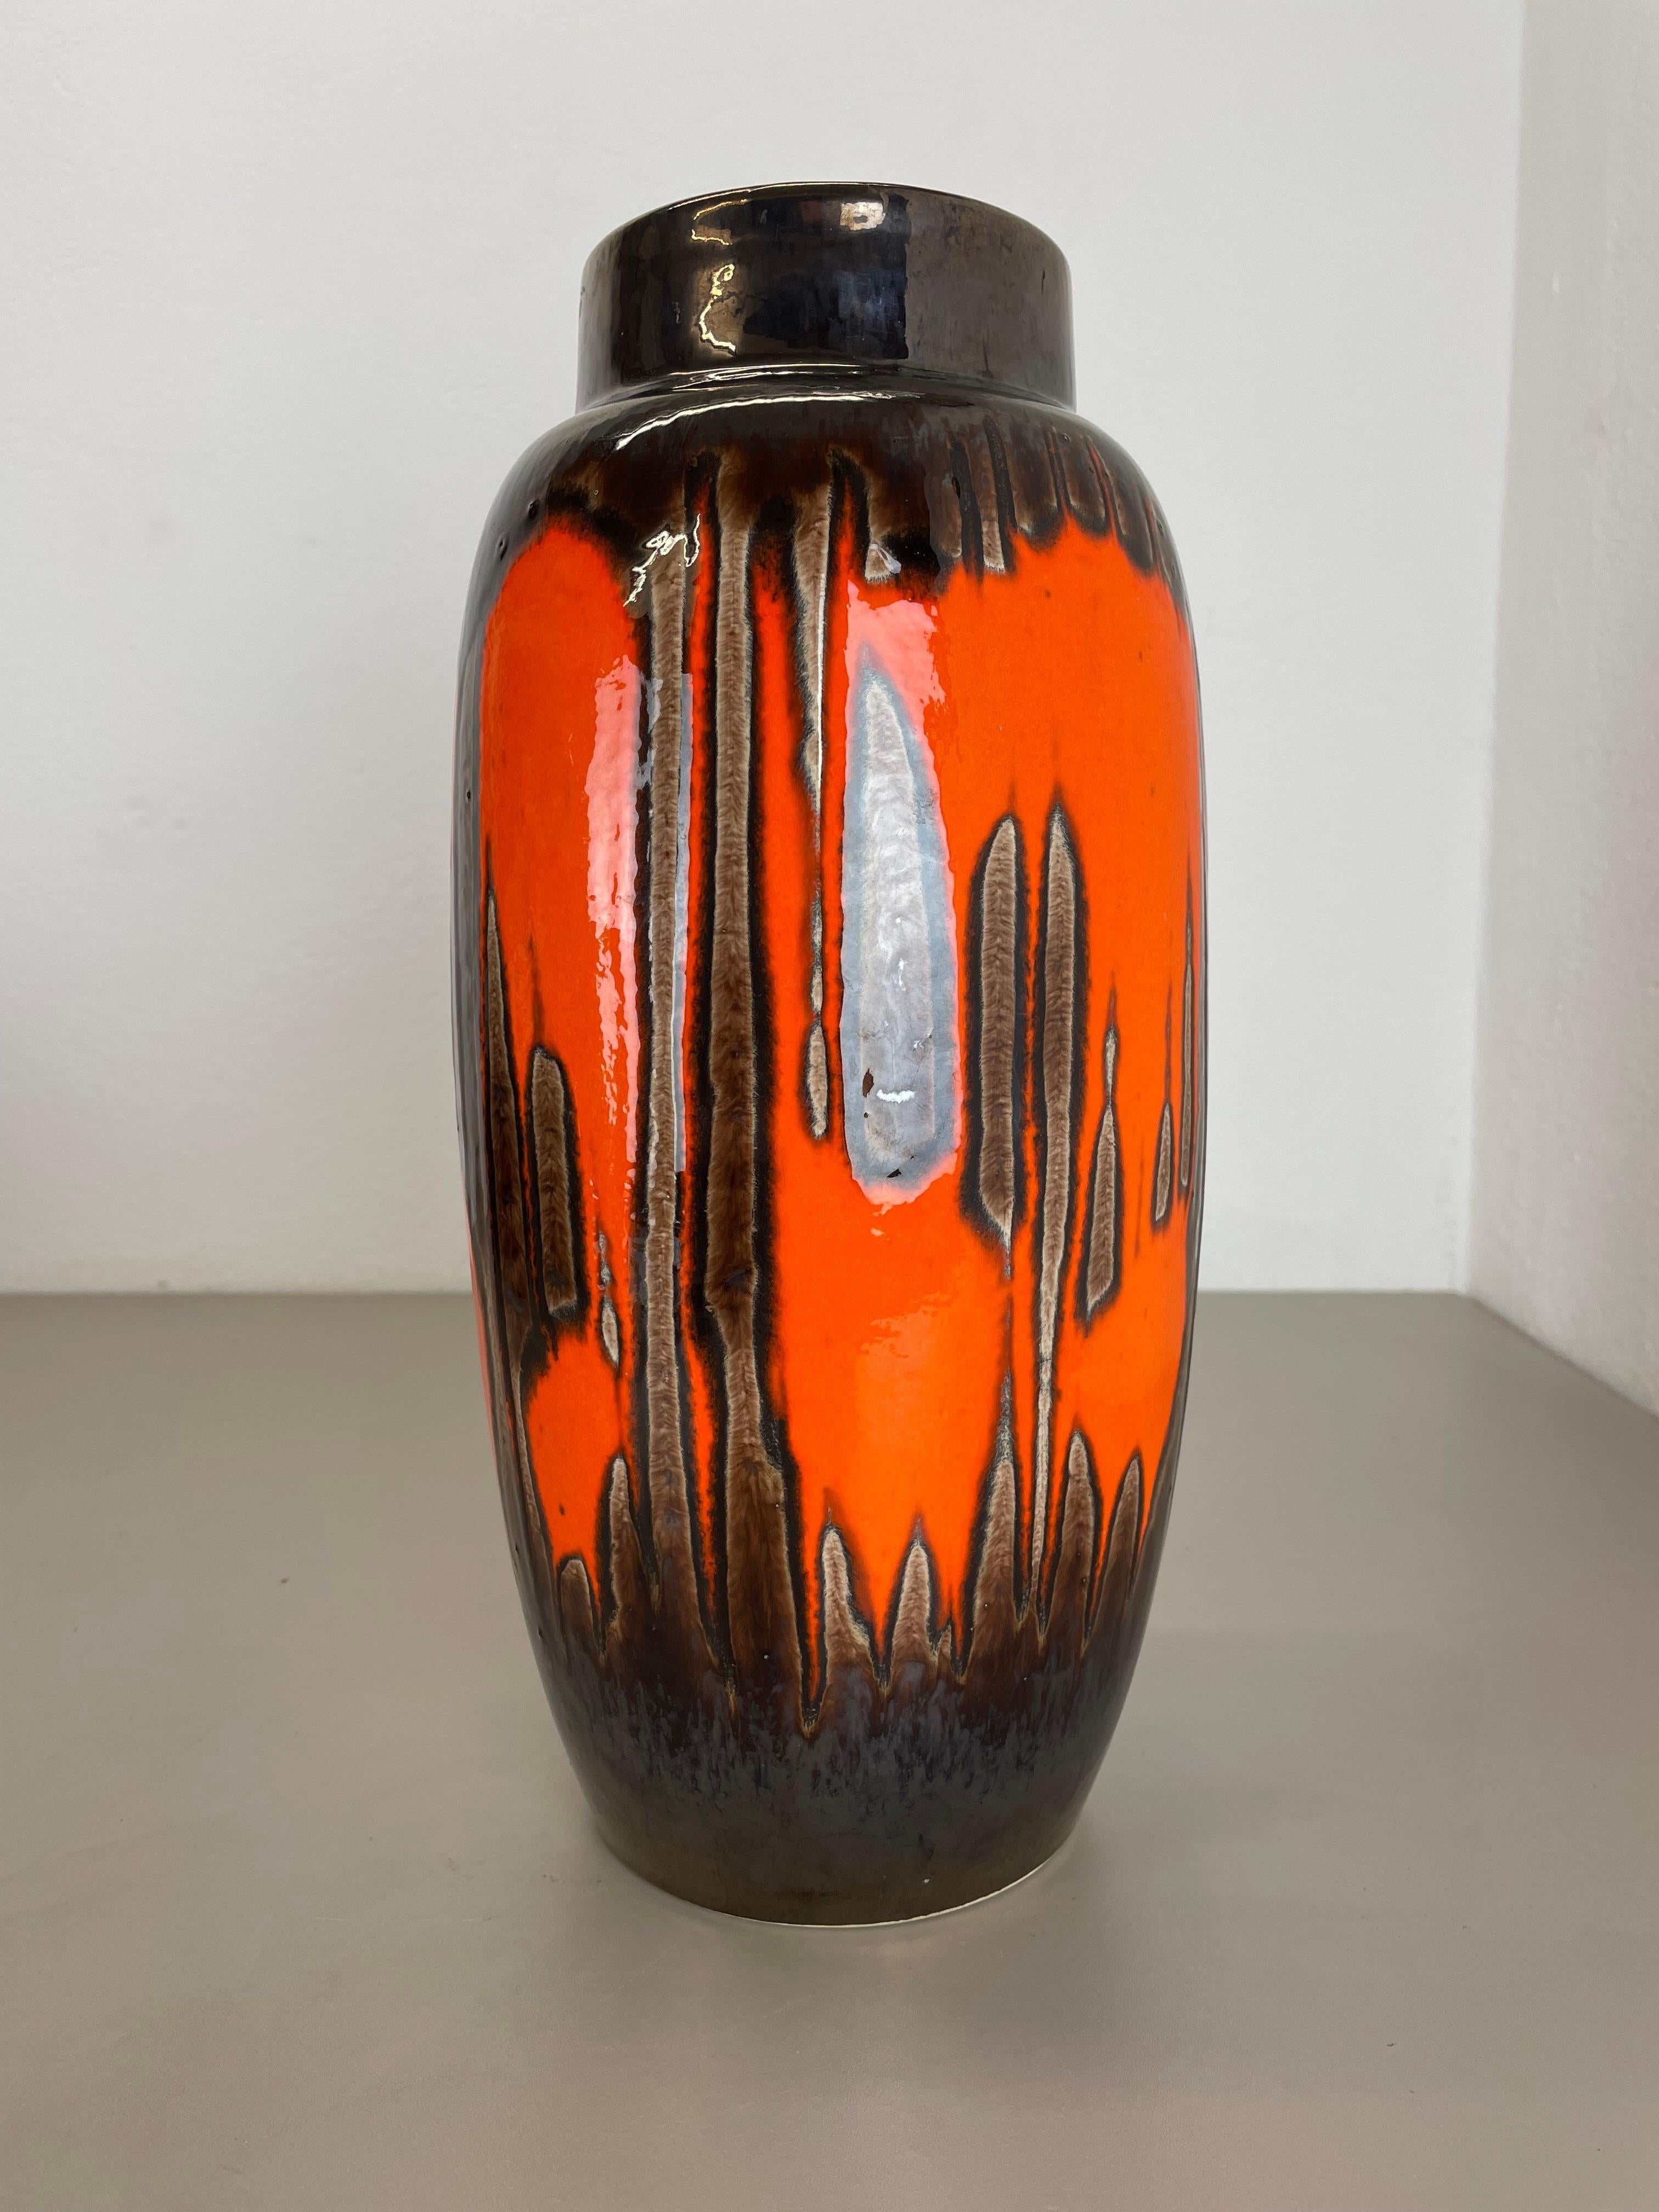 Article:

Fat lava art vase super rare ZIG ZAG DECOR.



Producer:

Scheurich, Germany



Decade:

1970s




This original vintage vase was produced in the 1970s in Germany by Scheurich. It is made of ceramic pottery in fat lava optic. Super rare in